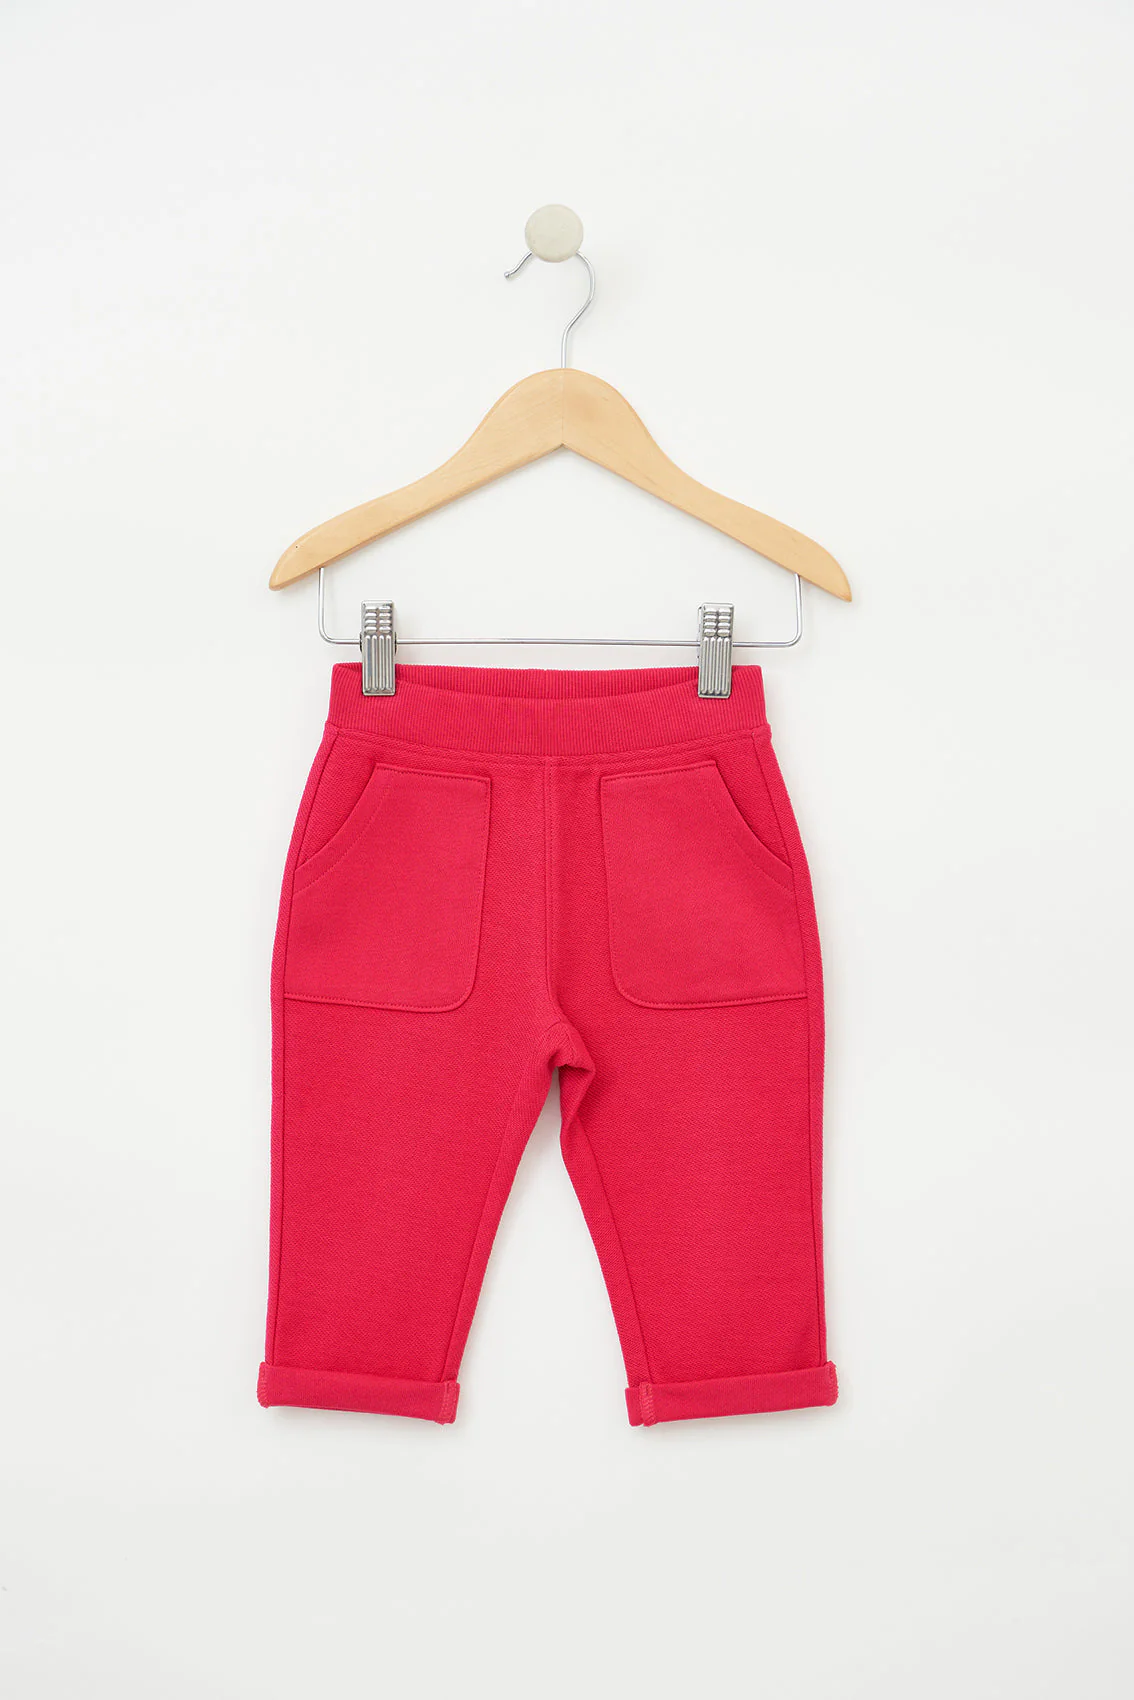 Batela Cotton Trousers - Red